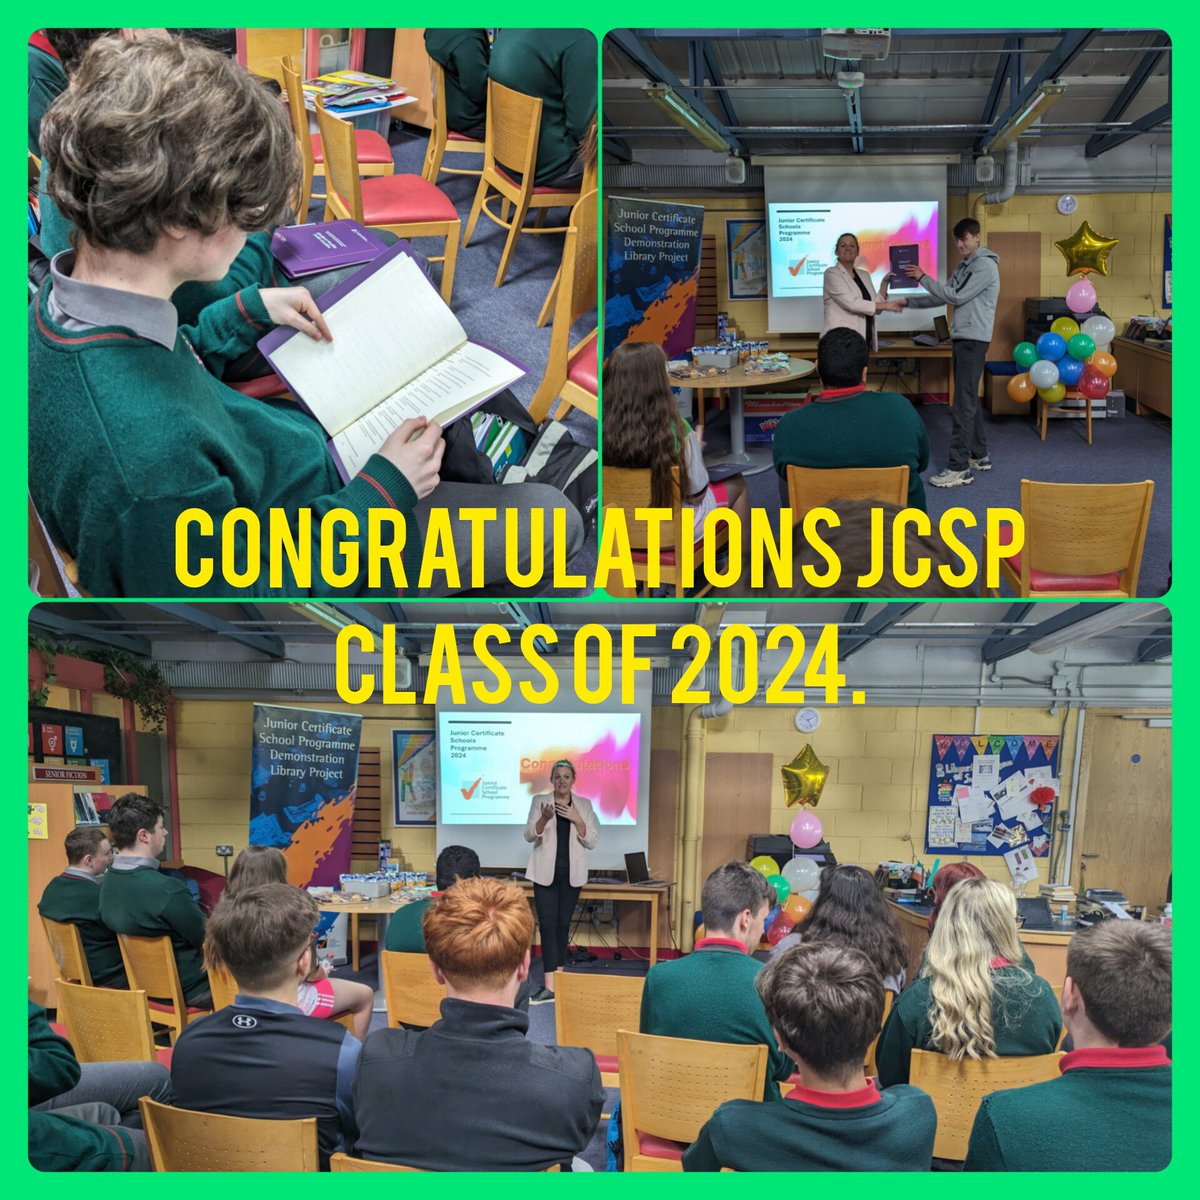 A very quick three years despite being masked for some of it!!!! Wonderful to celebrate their achievements this afternoon @jcsplibraries